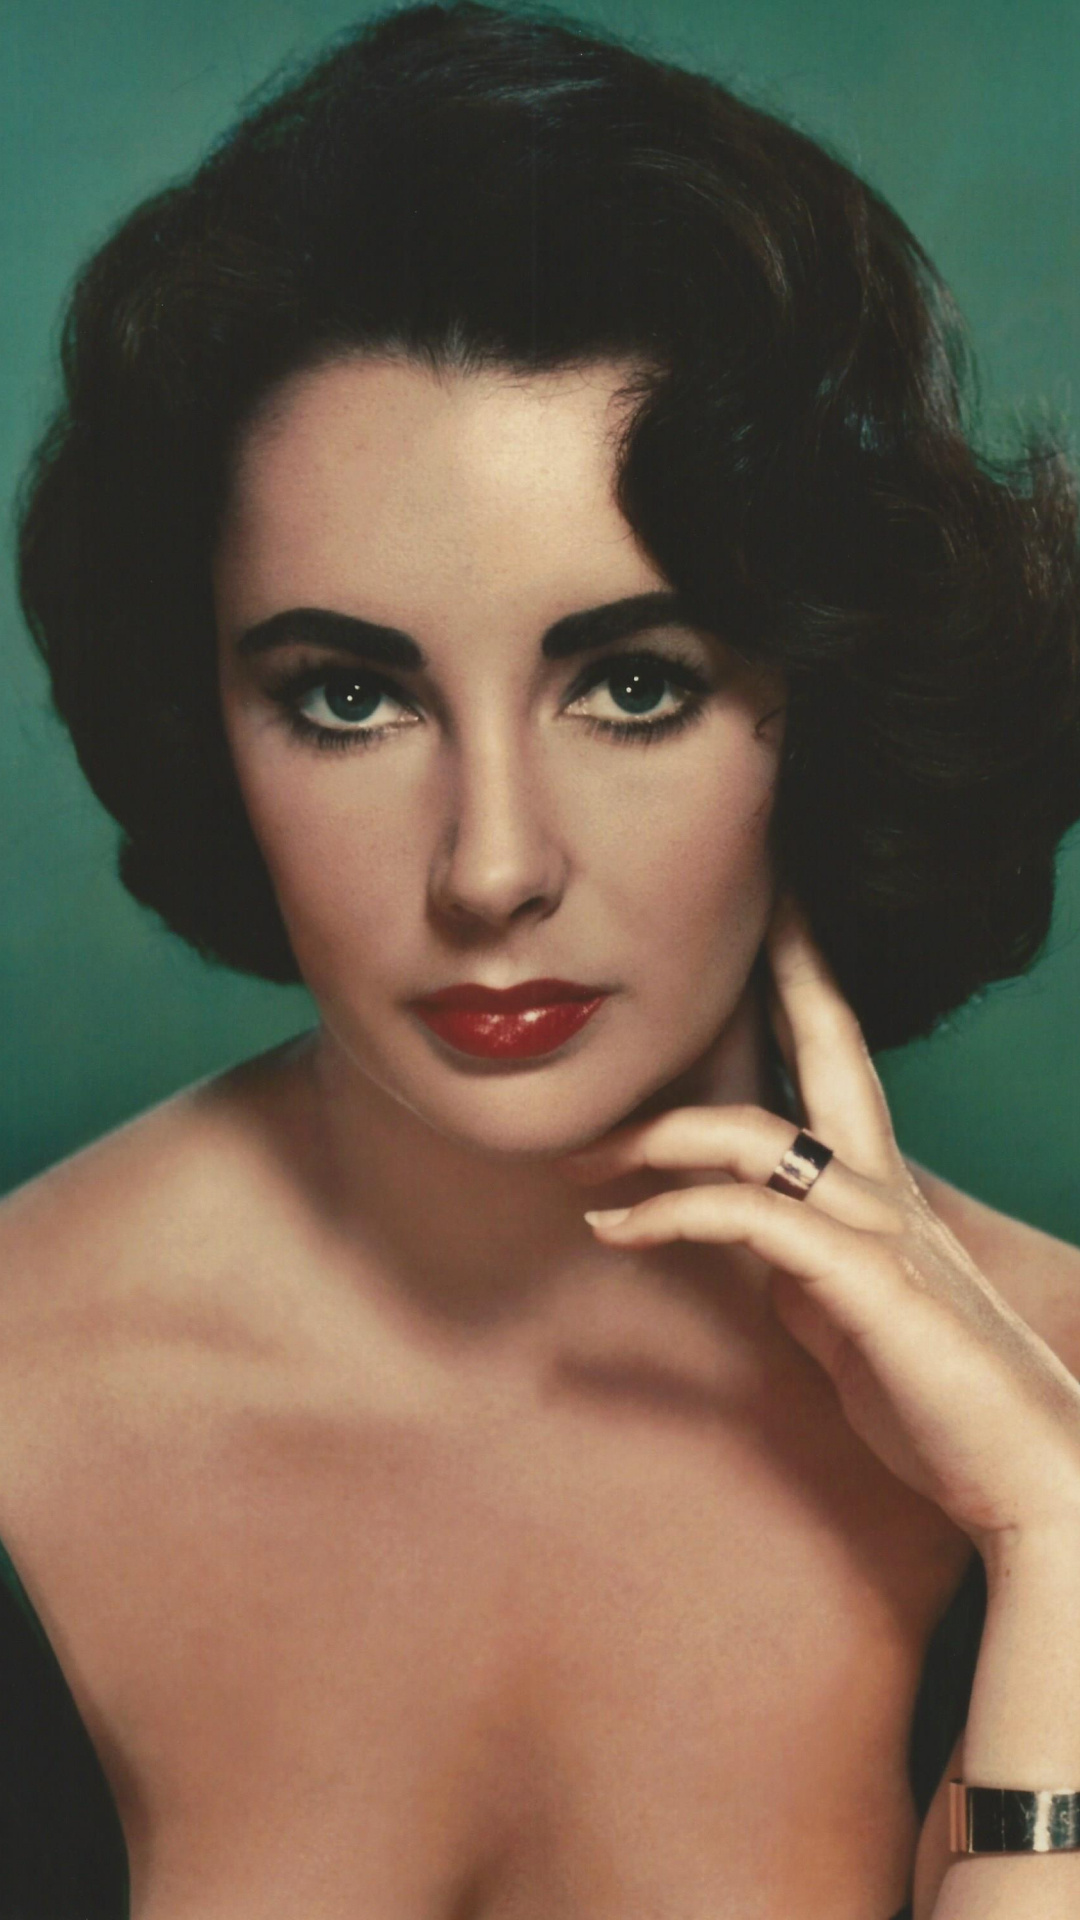 Elizabeth Taylor, Free wallpapers, Celebrity images, Stunning backgrounds, 1080x1920 Full HD Handy